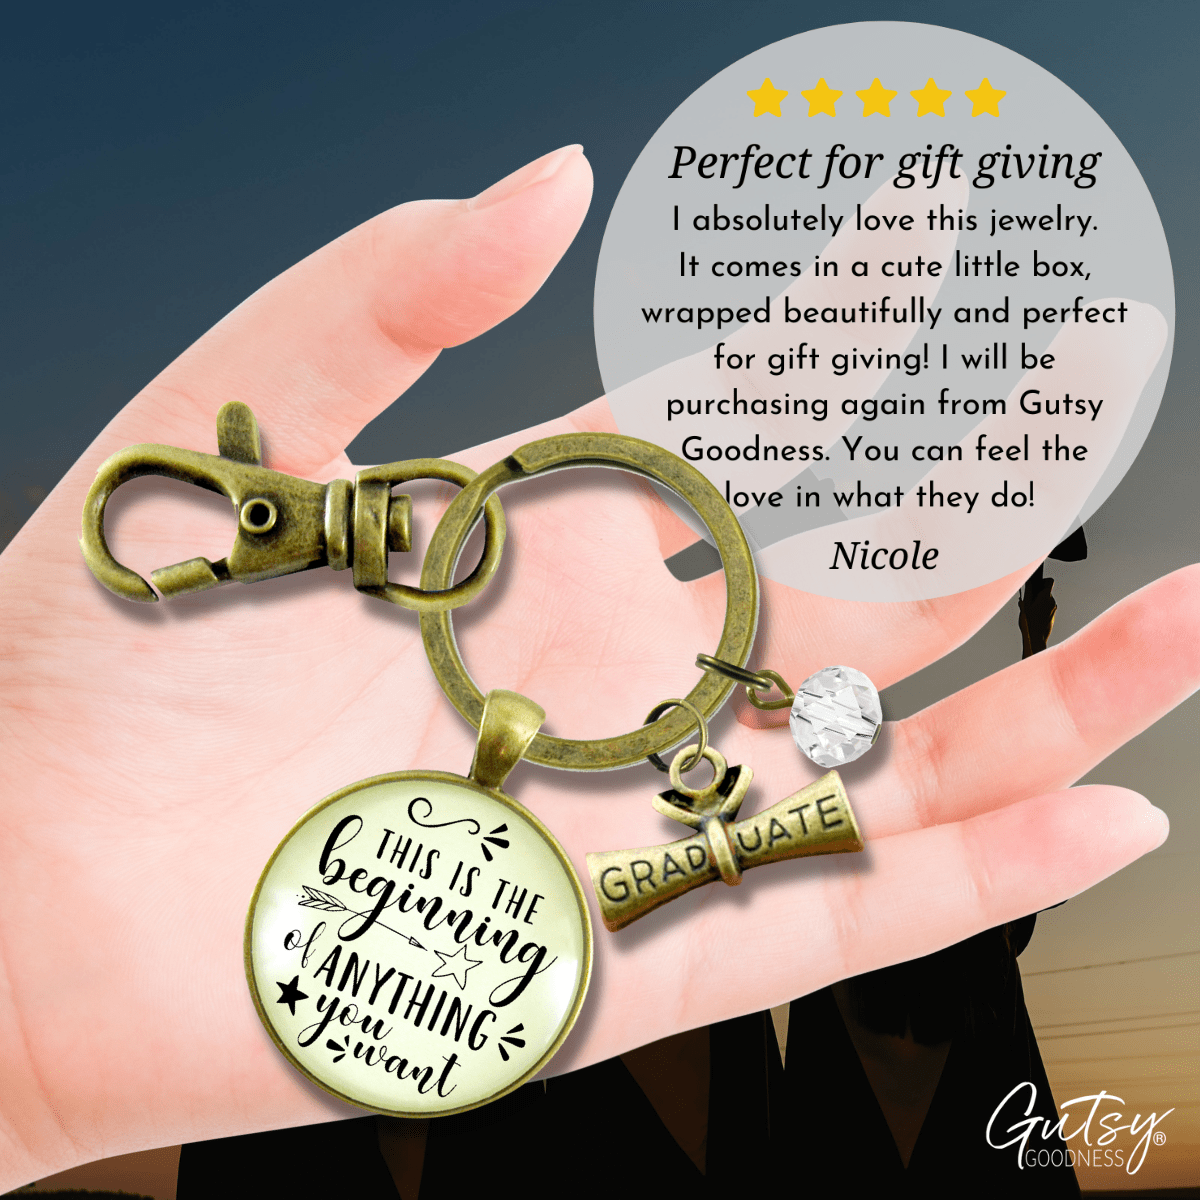 Inspirational Keychain This Is The Beginning Of Anything Life Mantra Star Jewelry Gift - Gutsy Goodness;Inspirational Keychain This Is The Beginning Of Anything Life Mantra Star Jewelry Gift - Gutsy Goodness Handmade Jewelry Gifts